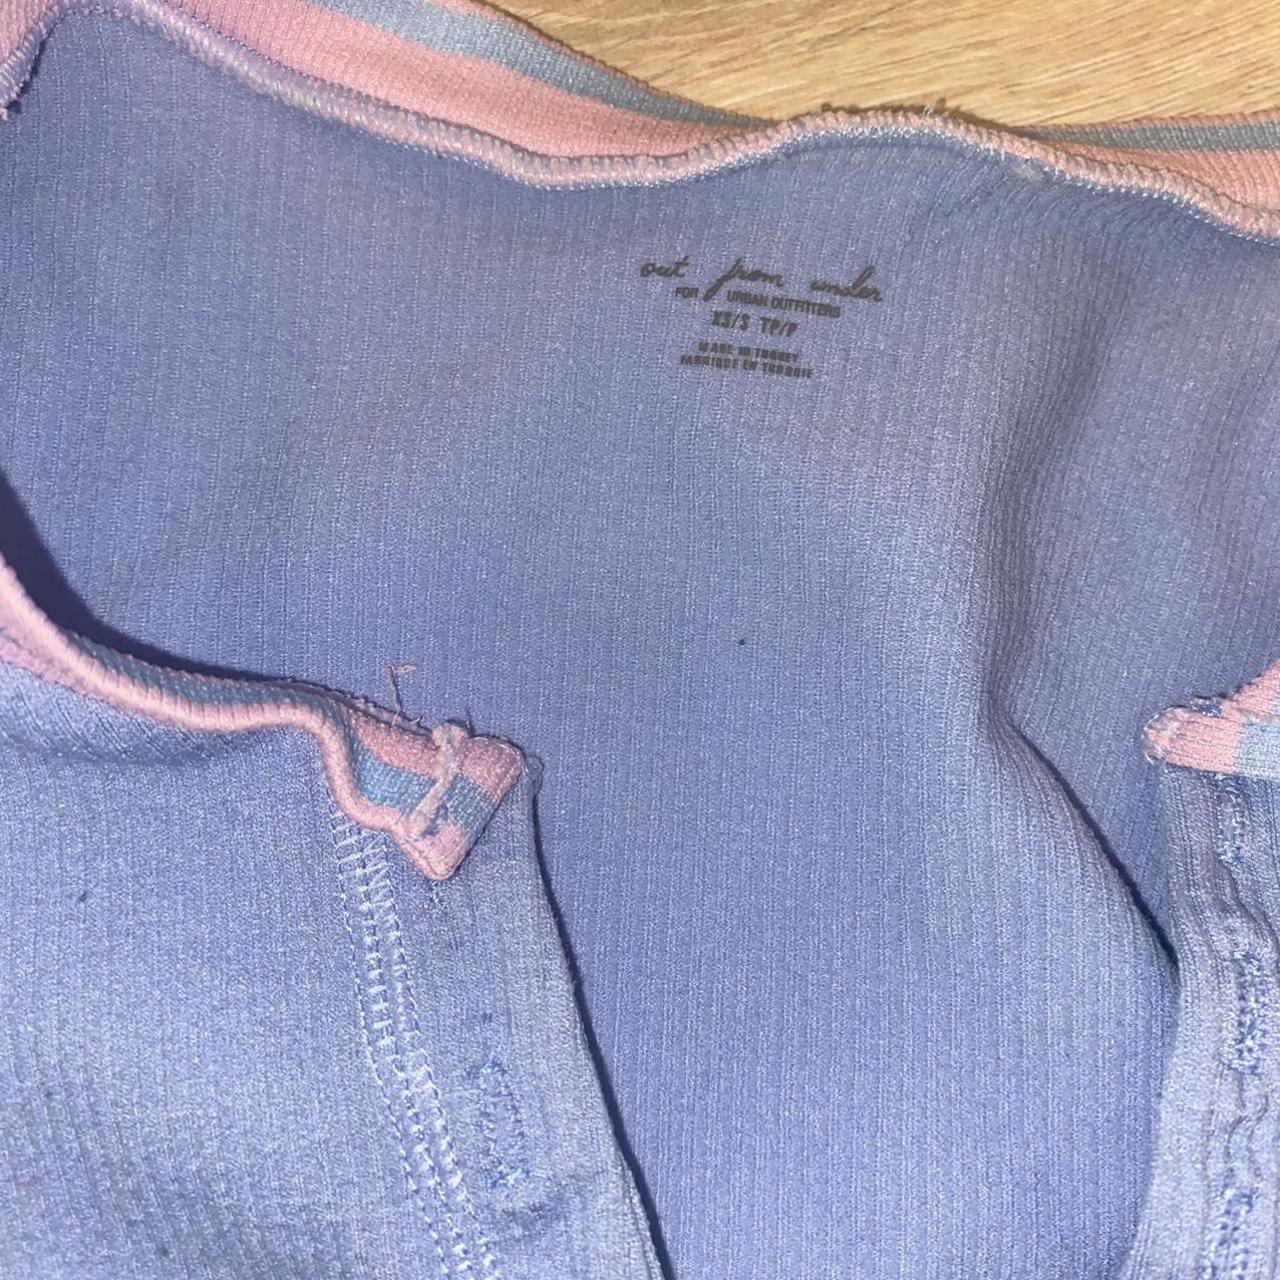 Urban Outfitters Women's Blue and Pink Crop-top | Depop